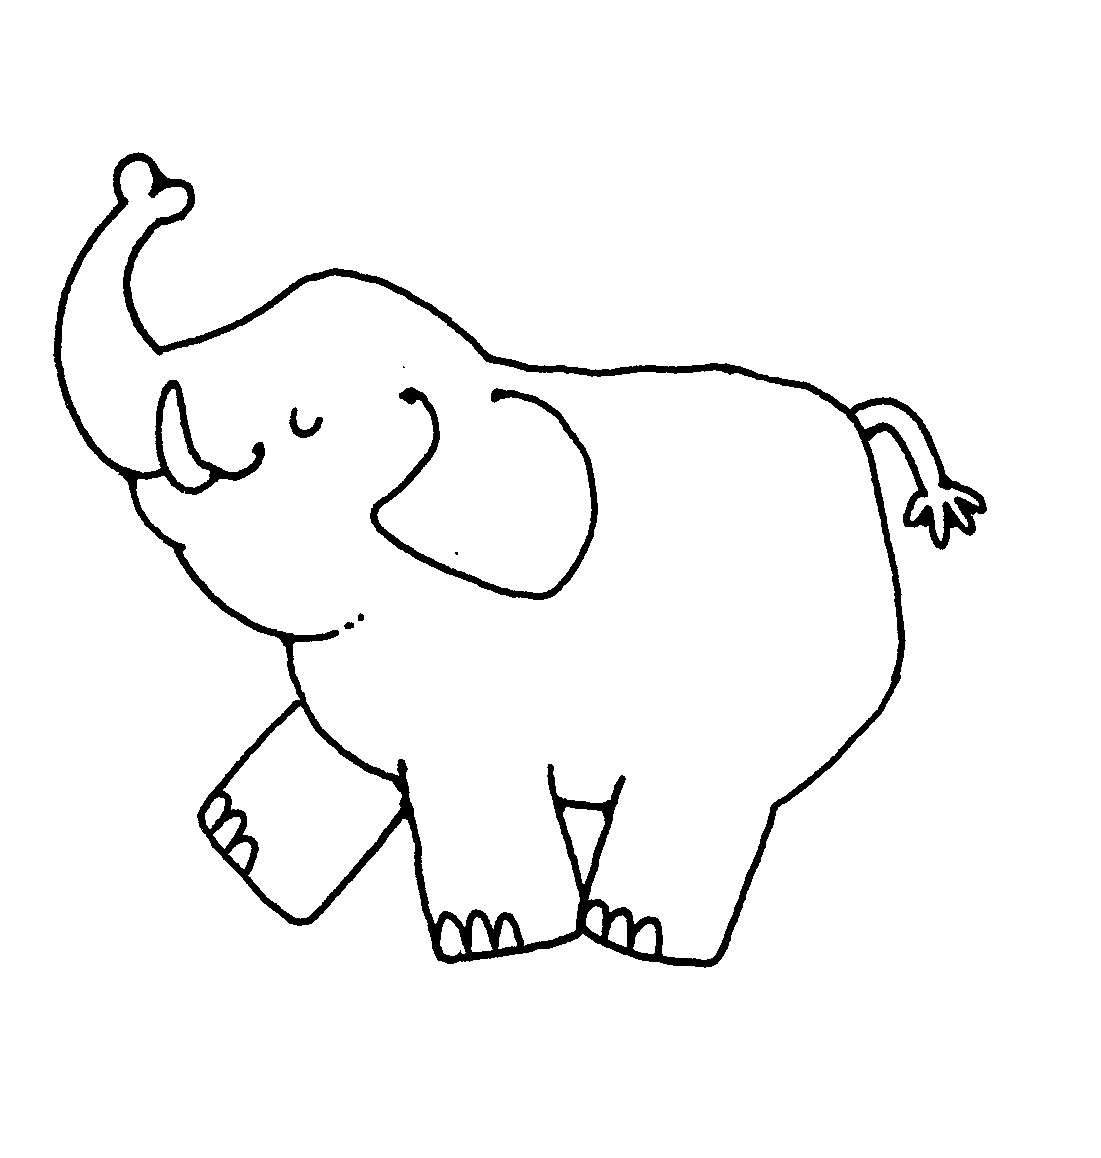 Free Elephant Images Black And White, Download Free Clip ...